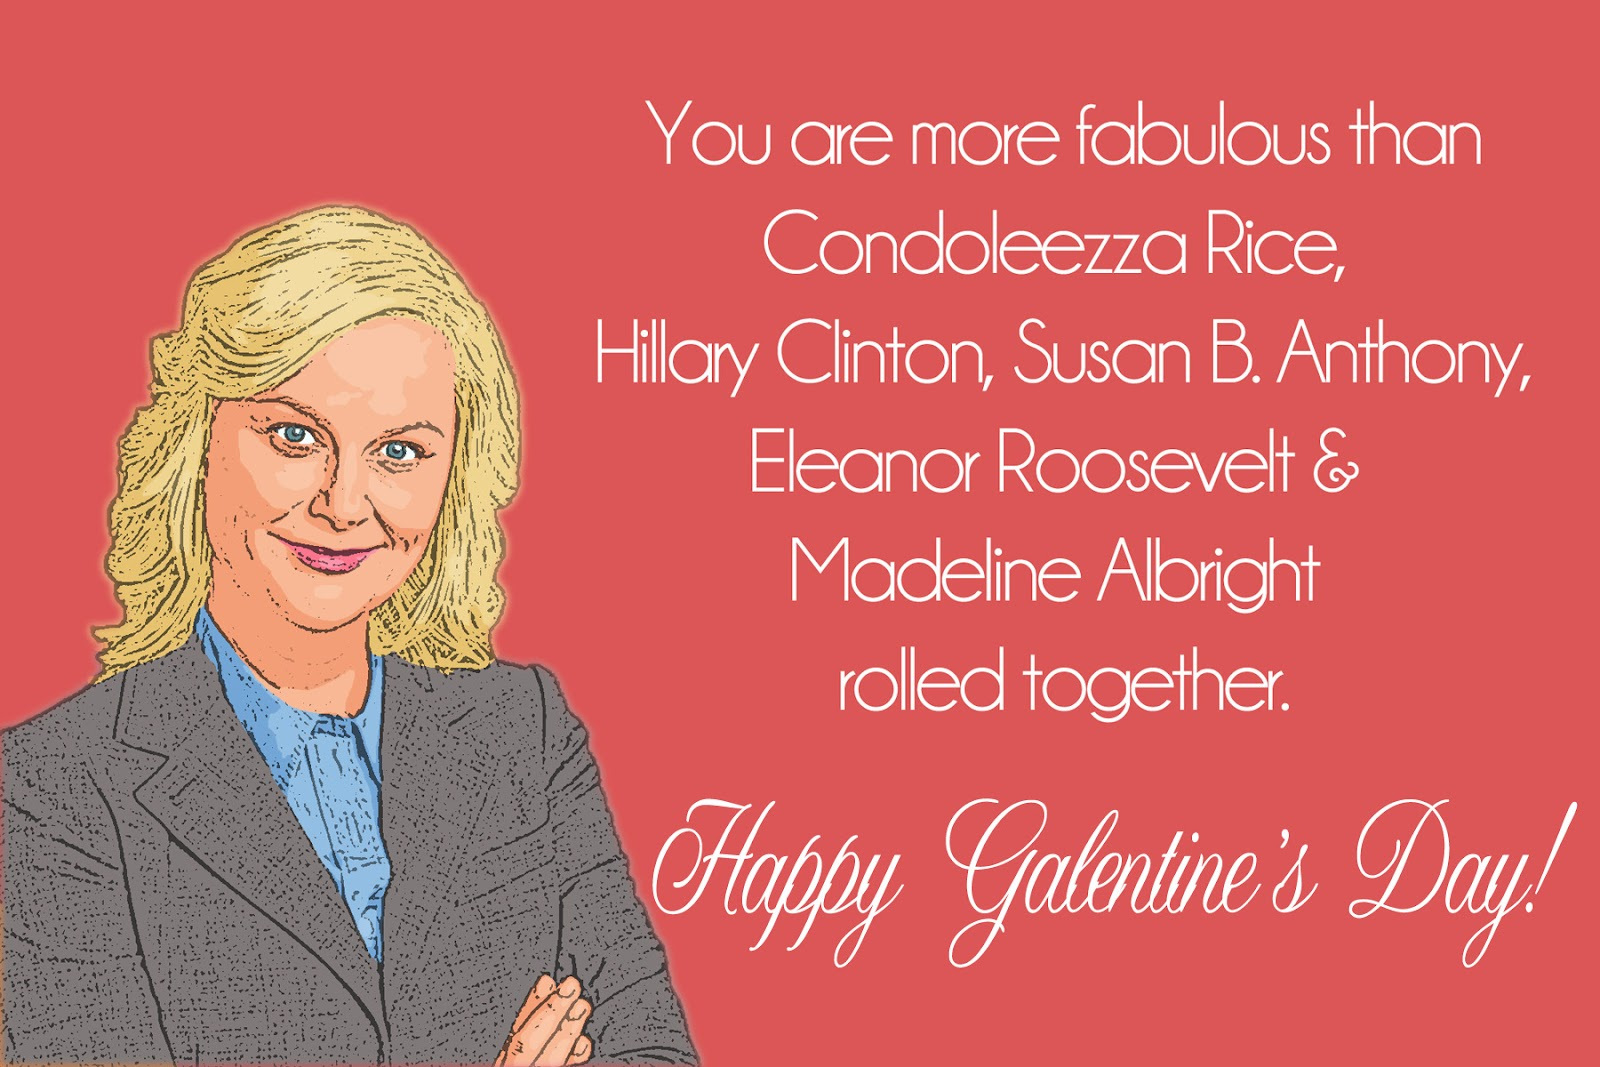 Galentine’s Day celebrating female friendships and political power they hold